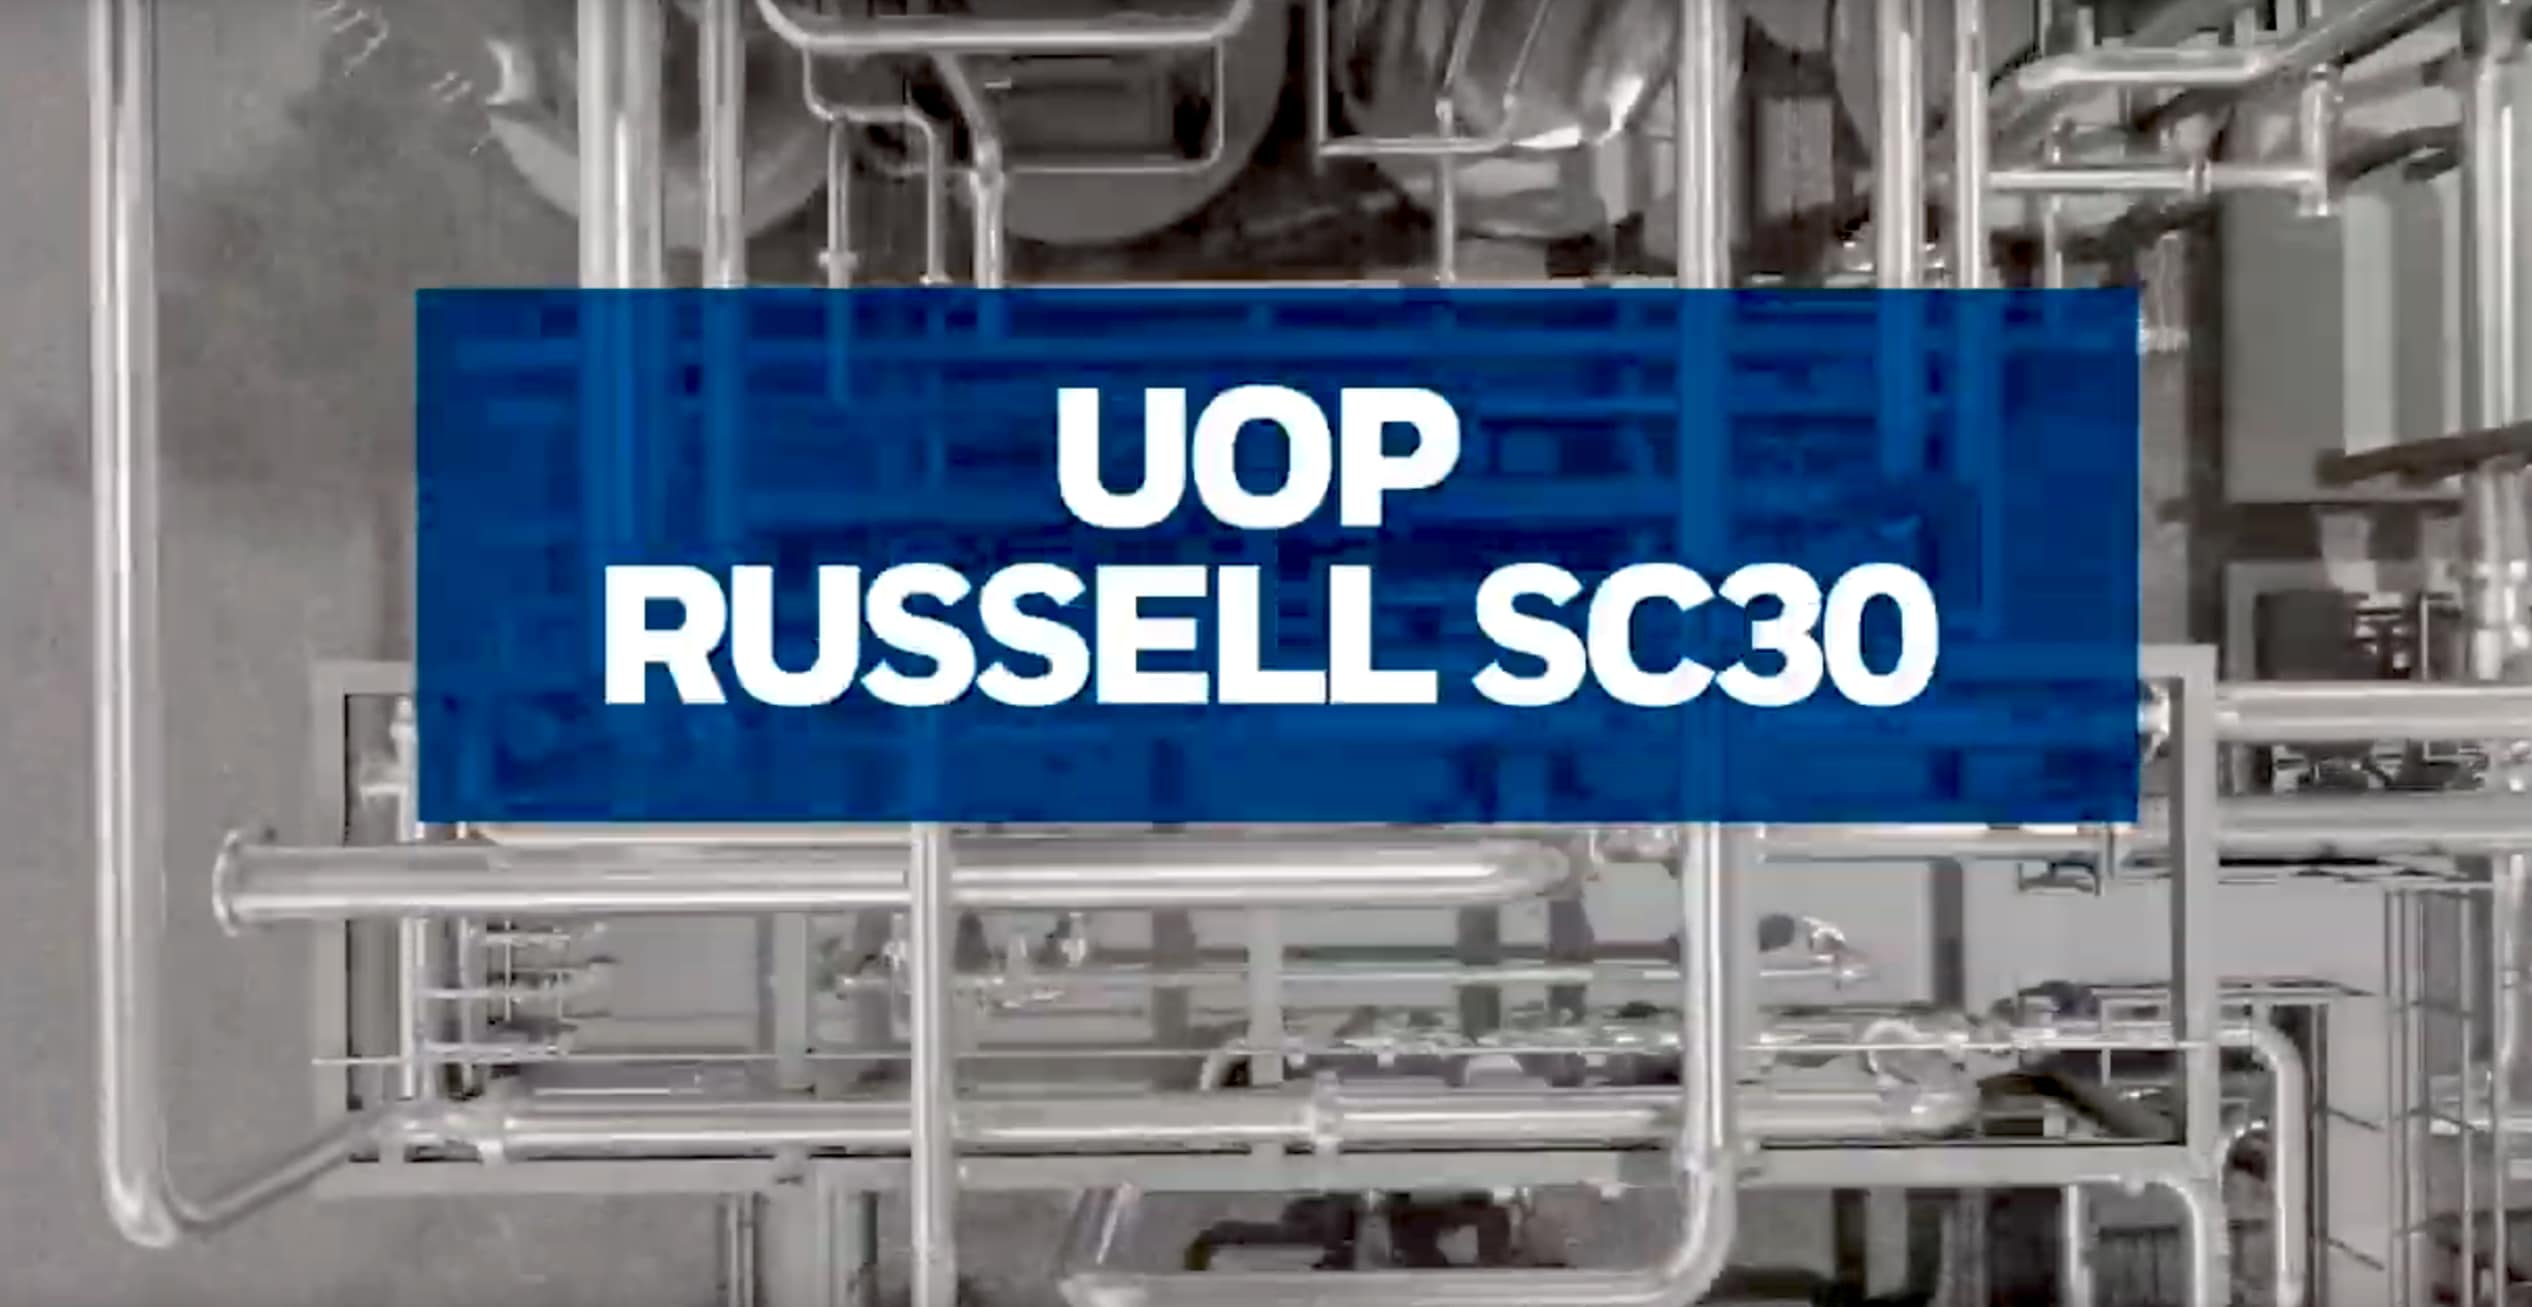 The UOP Russell SC30 from Honeywell is the first modular cryogenic gas plant capable of processing 300 cubic feet-per-day.